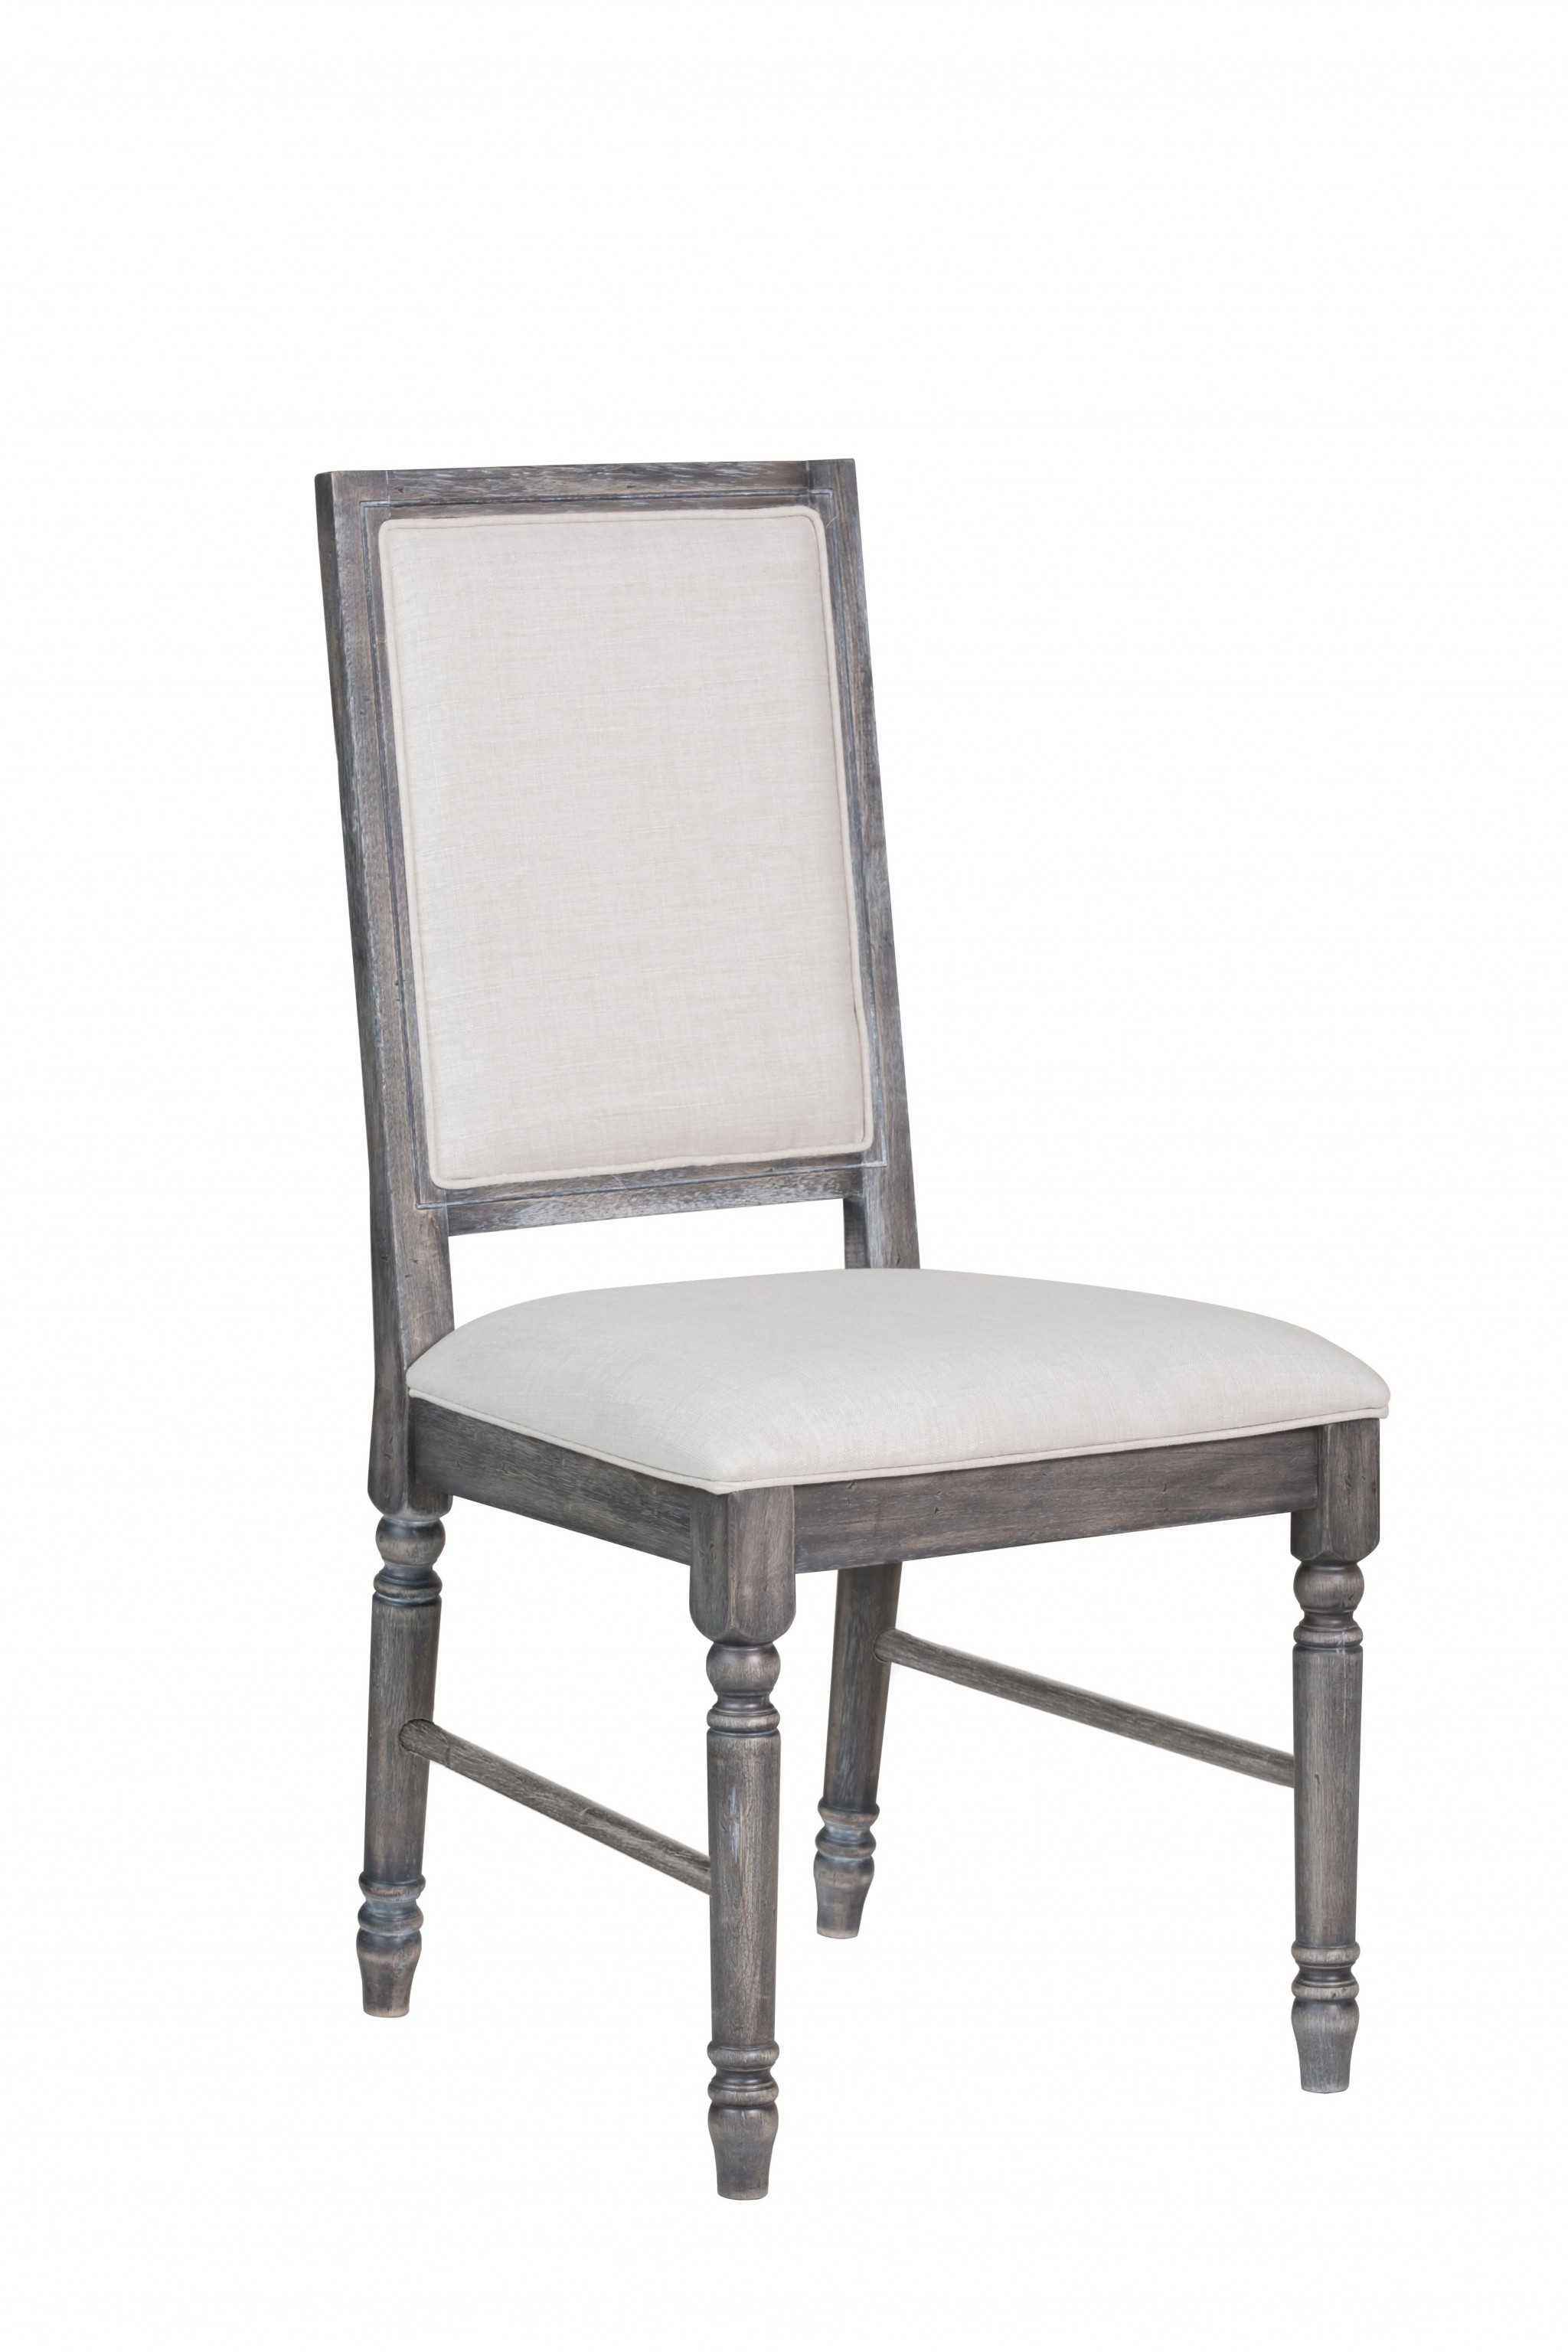 20" X 22" X 40" 2pc Light Cream Linen And Weathered Gray Side Chair